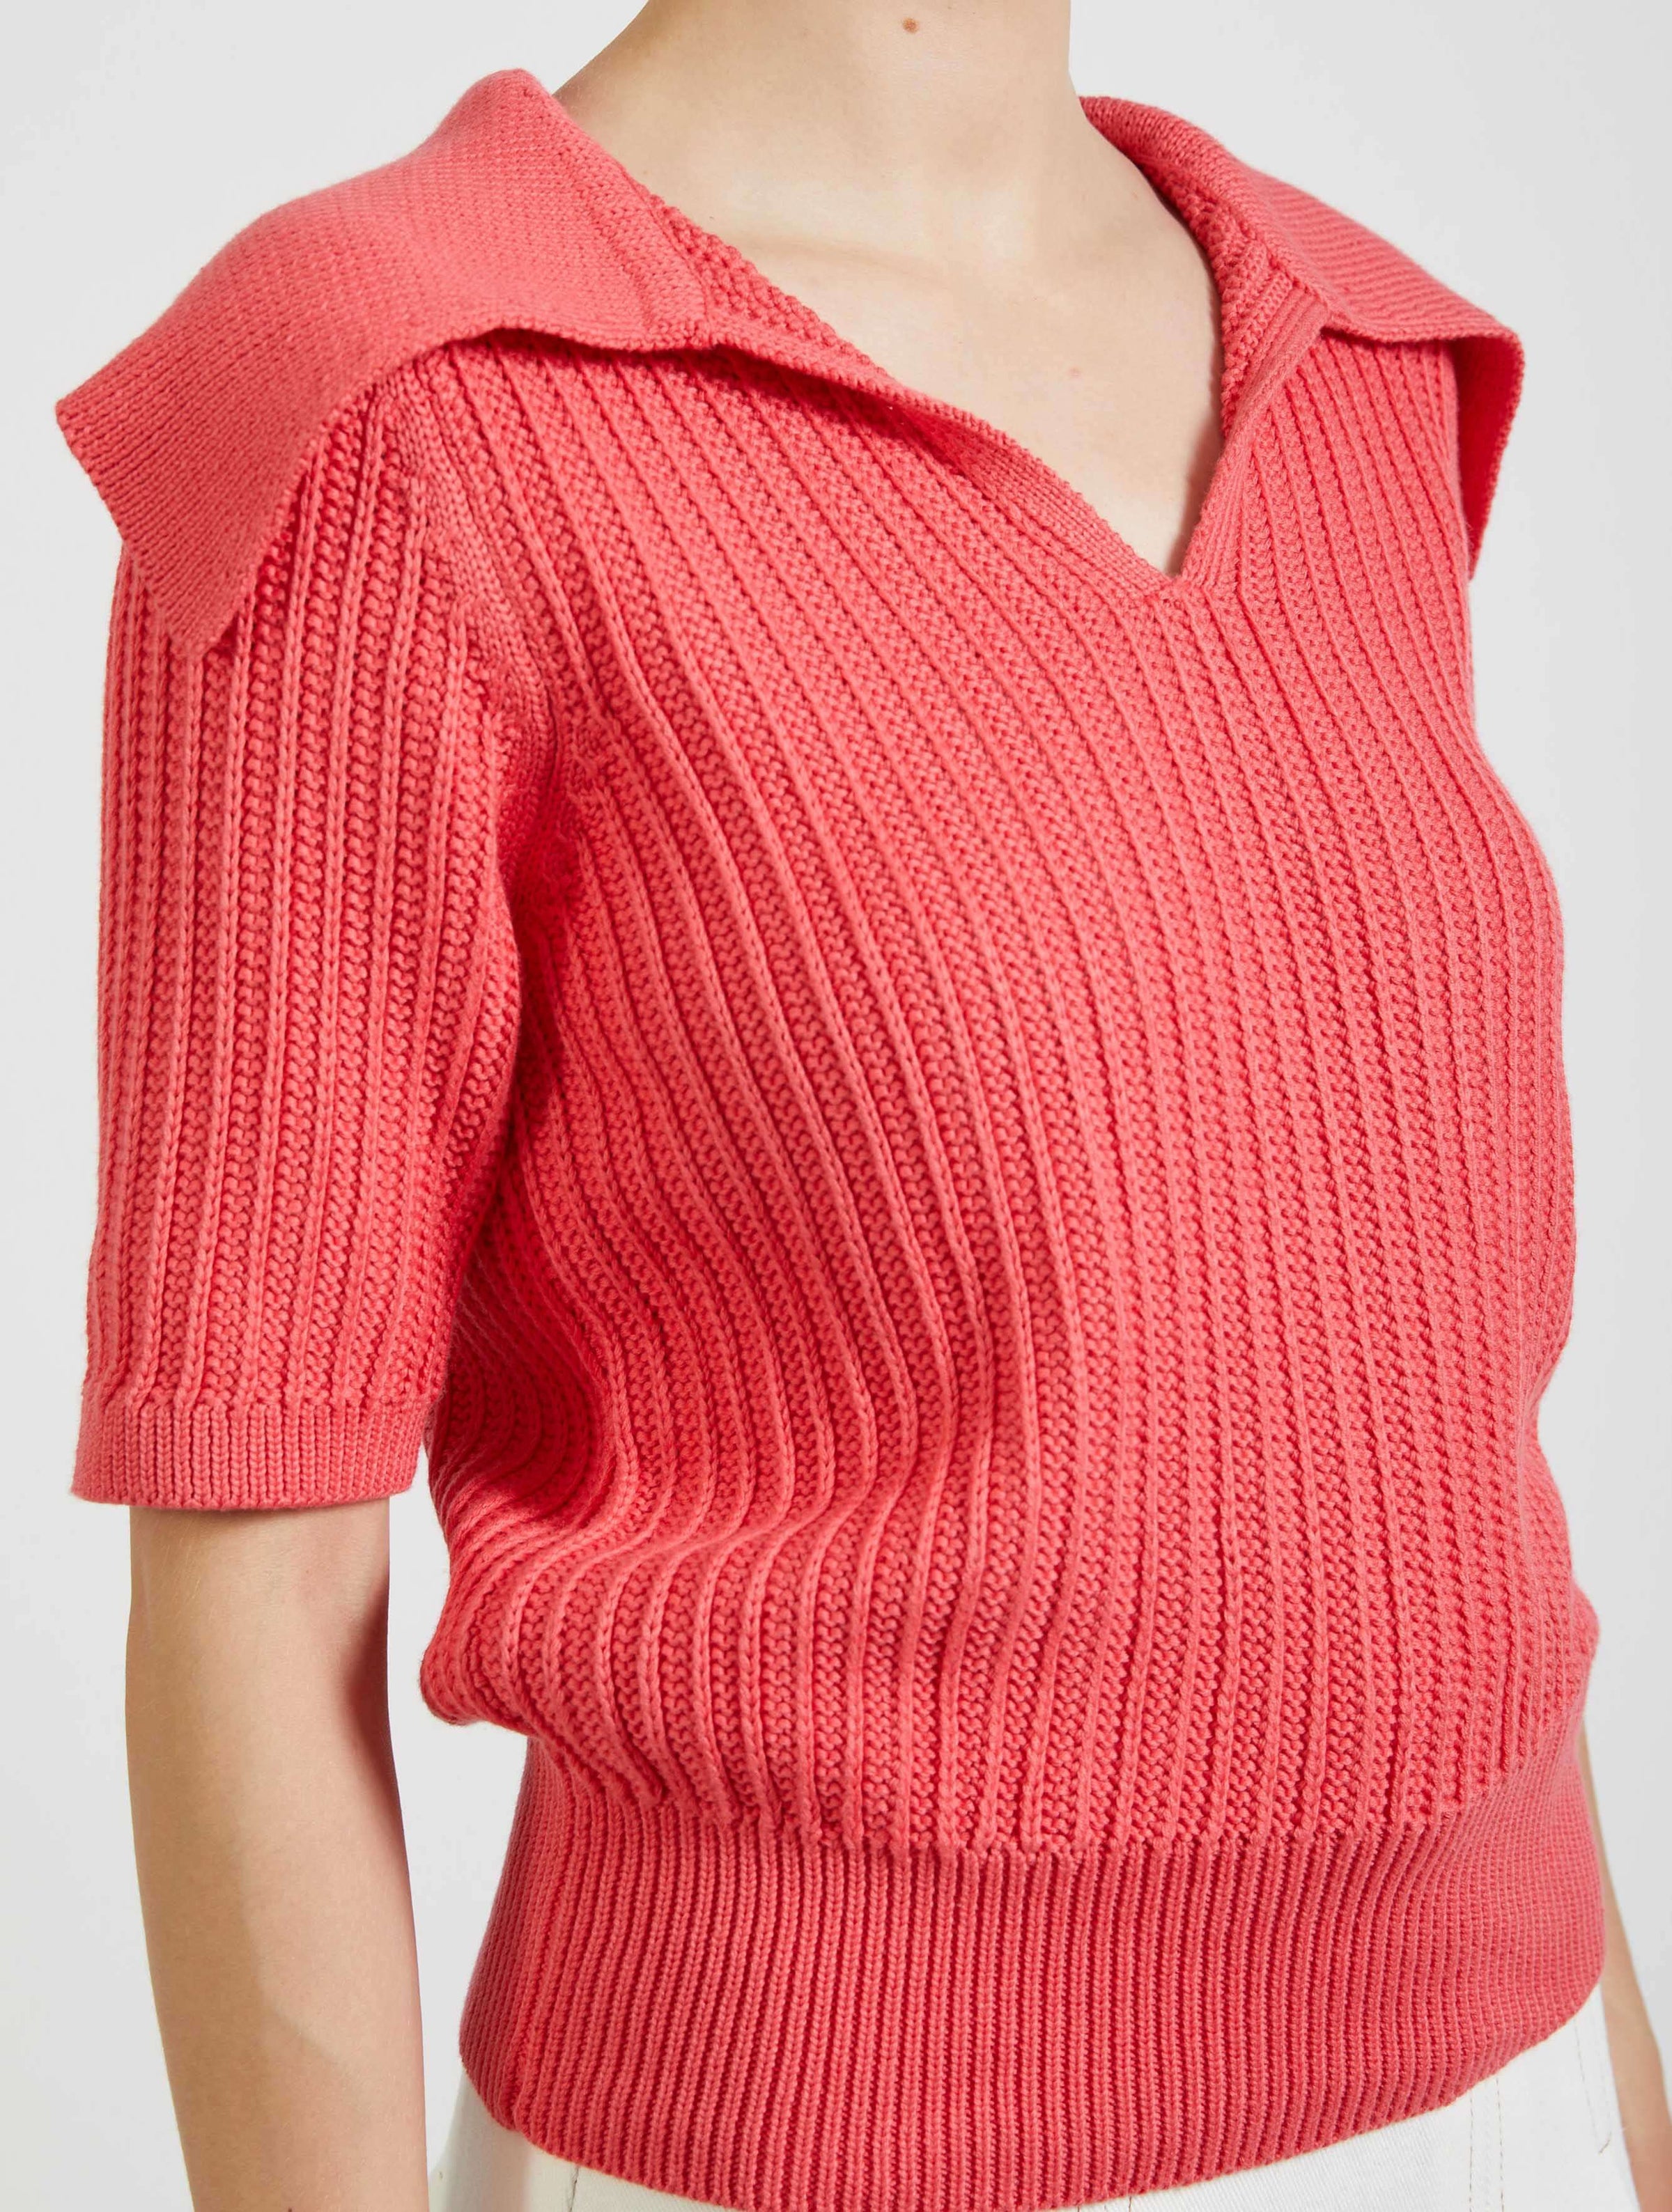 Collared Knit Top in Coral Pink